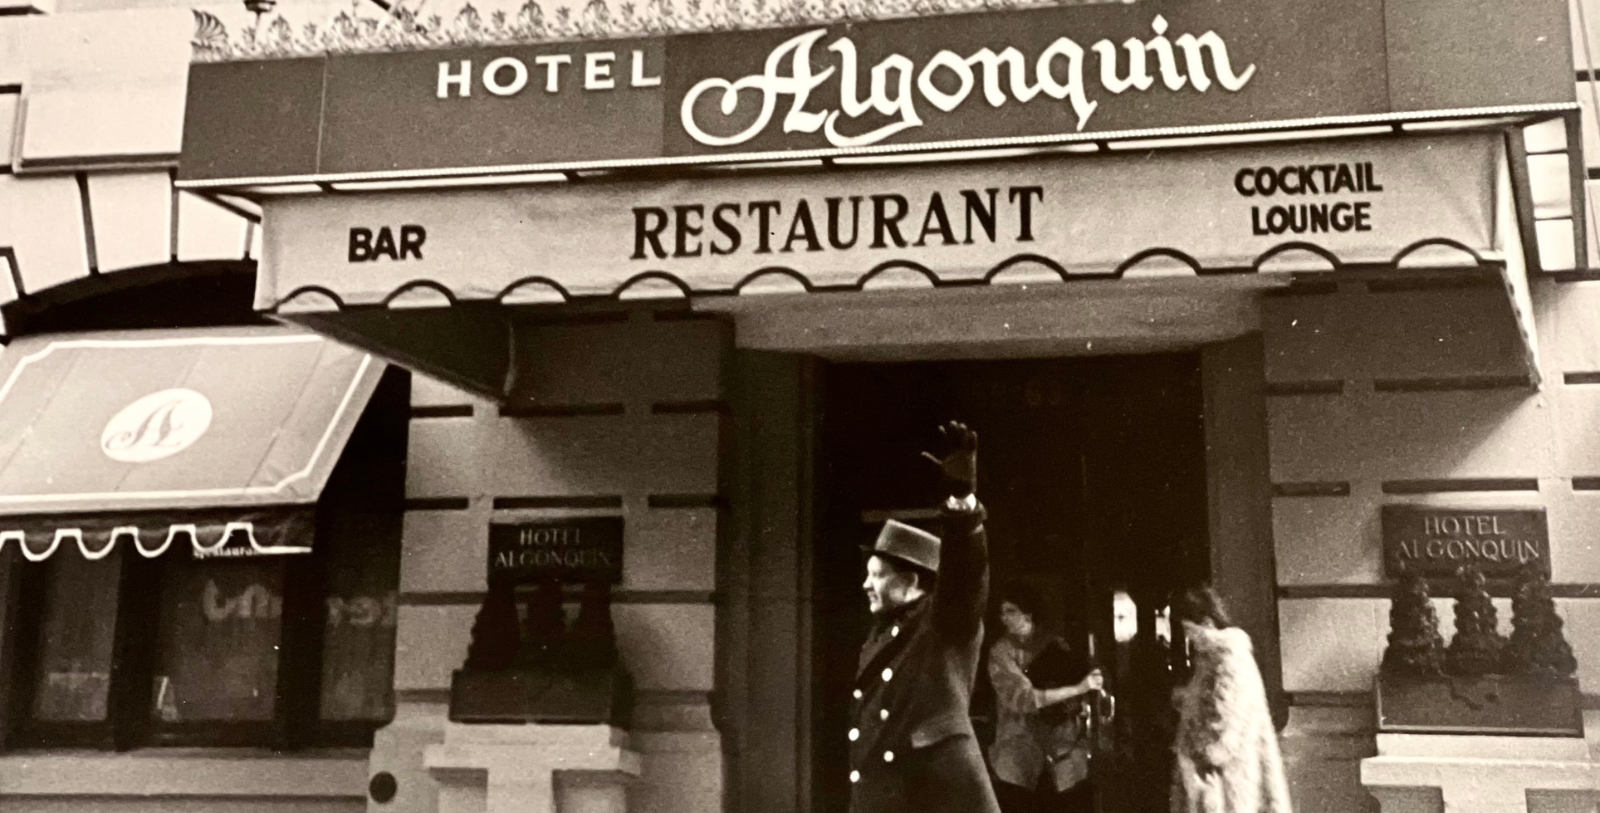 Discover The Algonquin Hotel’s role in American literature, art, and culture as host to the famous “Vicious Circle” luncheons during the Roaring 20s.